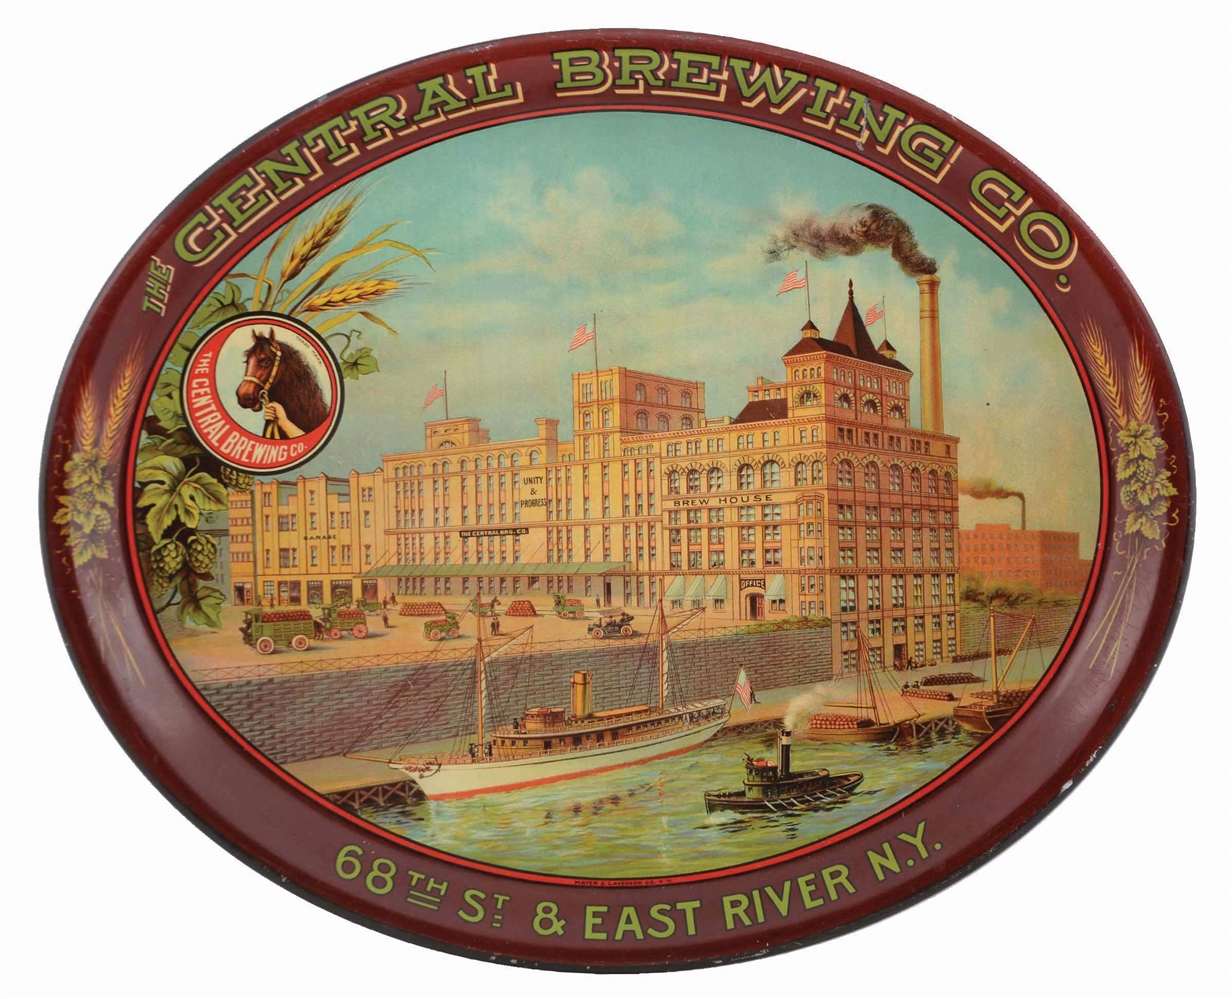 THE CENTRAL BREWING CO. ADVERTISING TRAY. 